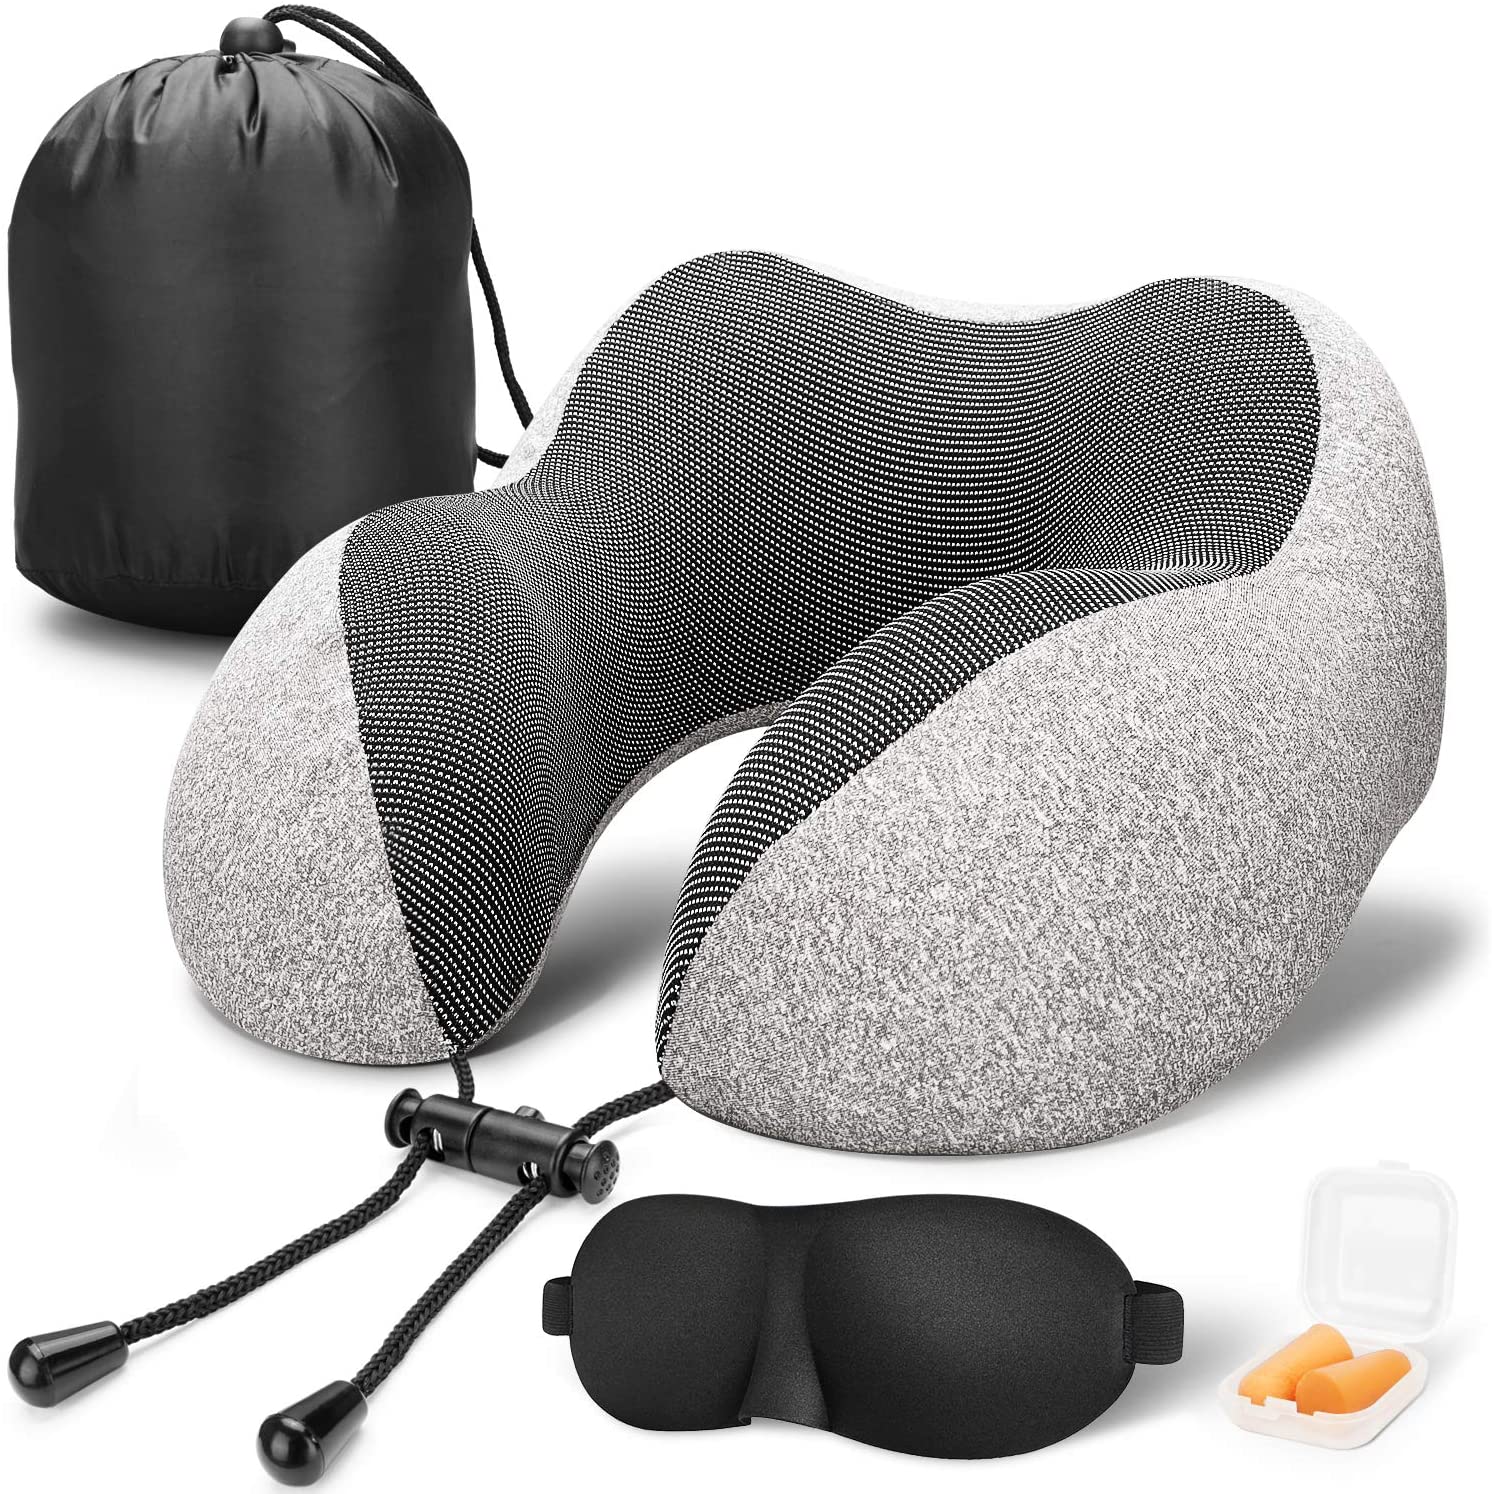 Inflatable Travel Pillow,SGODDE Comfortable Ergonomic and Portable Head Neck Rest Pillow,Patented Design,Best Travel Pillow for Airplanes,Cars,Buses Camping Office Napping Trains